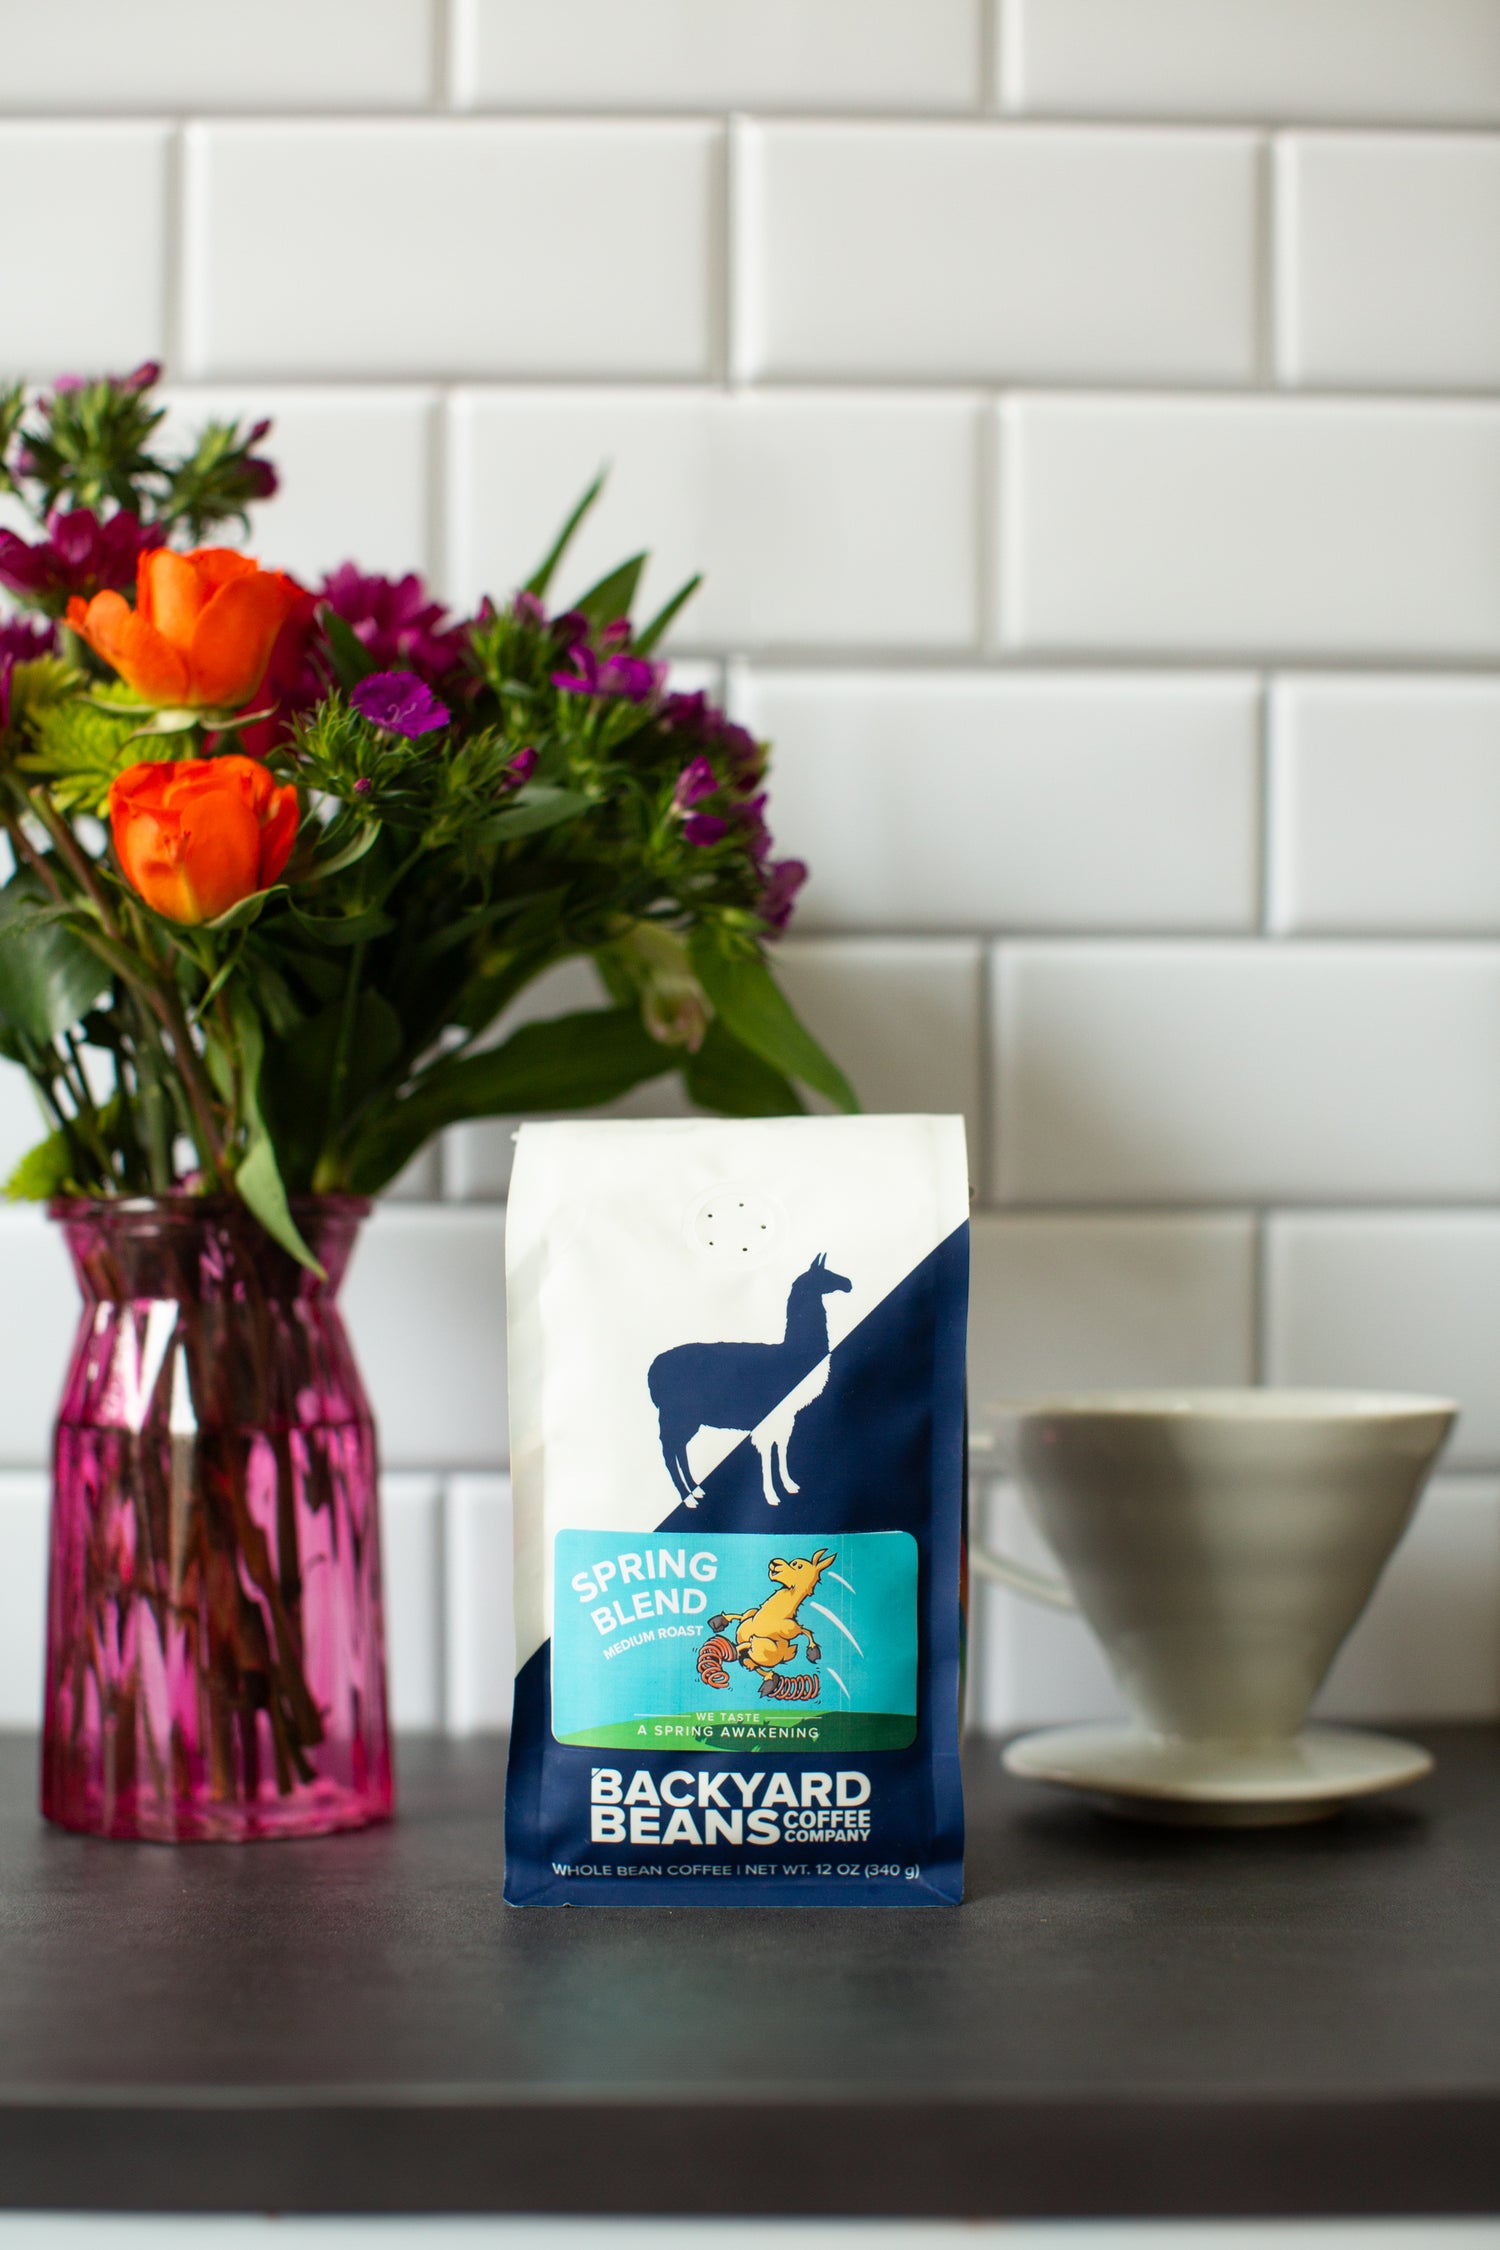 Image of Spring Blend coffee bag on kitchen counter with flowers and pour over.